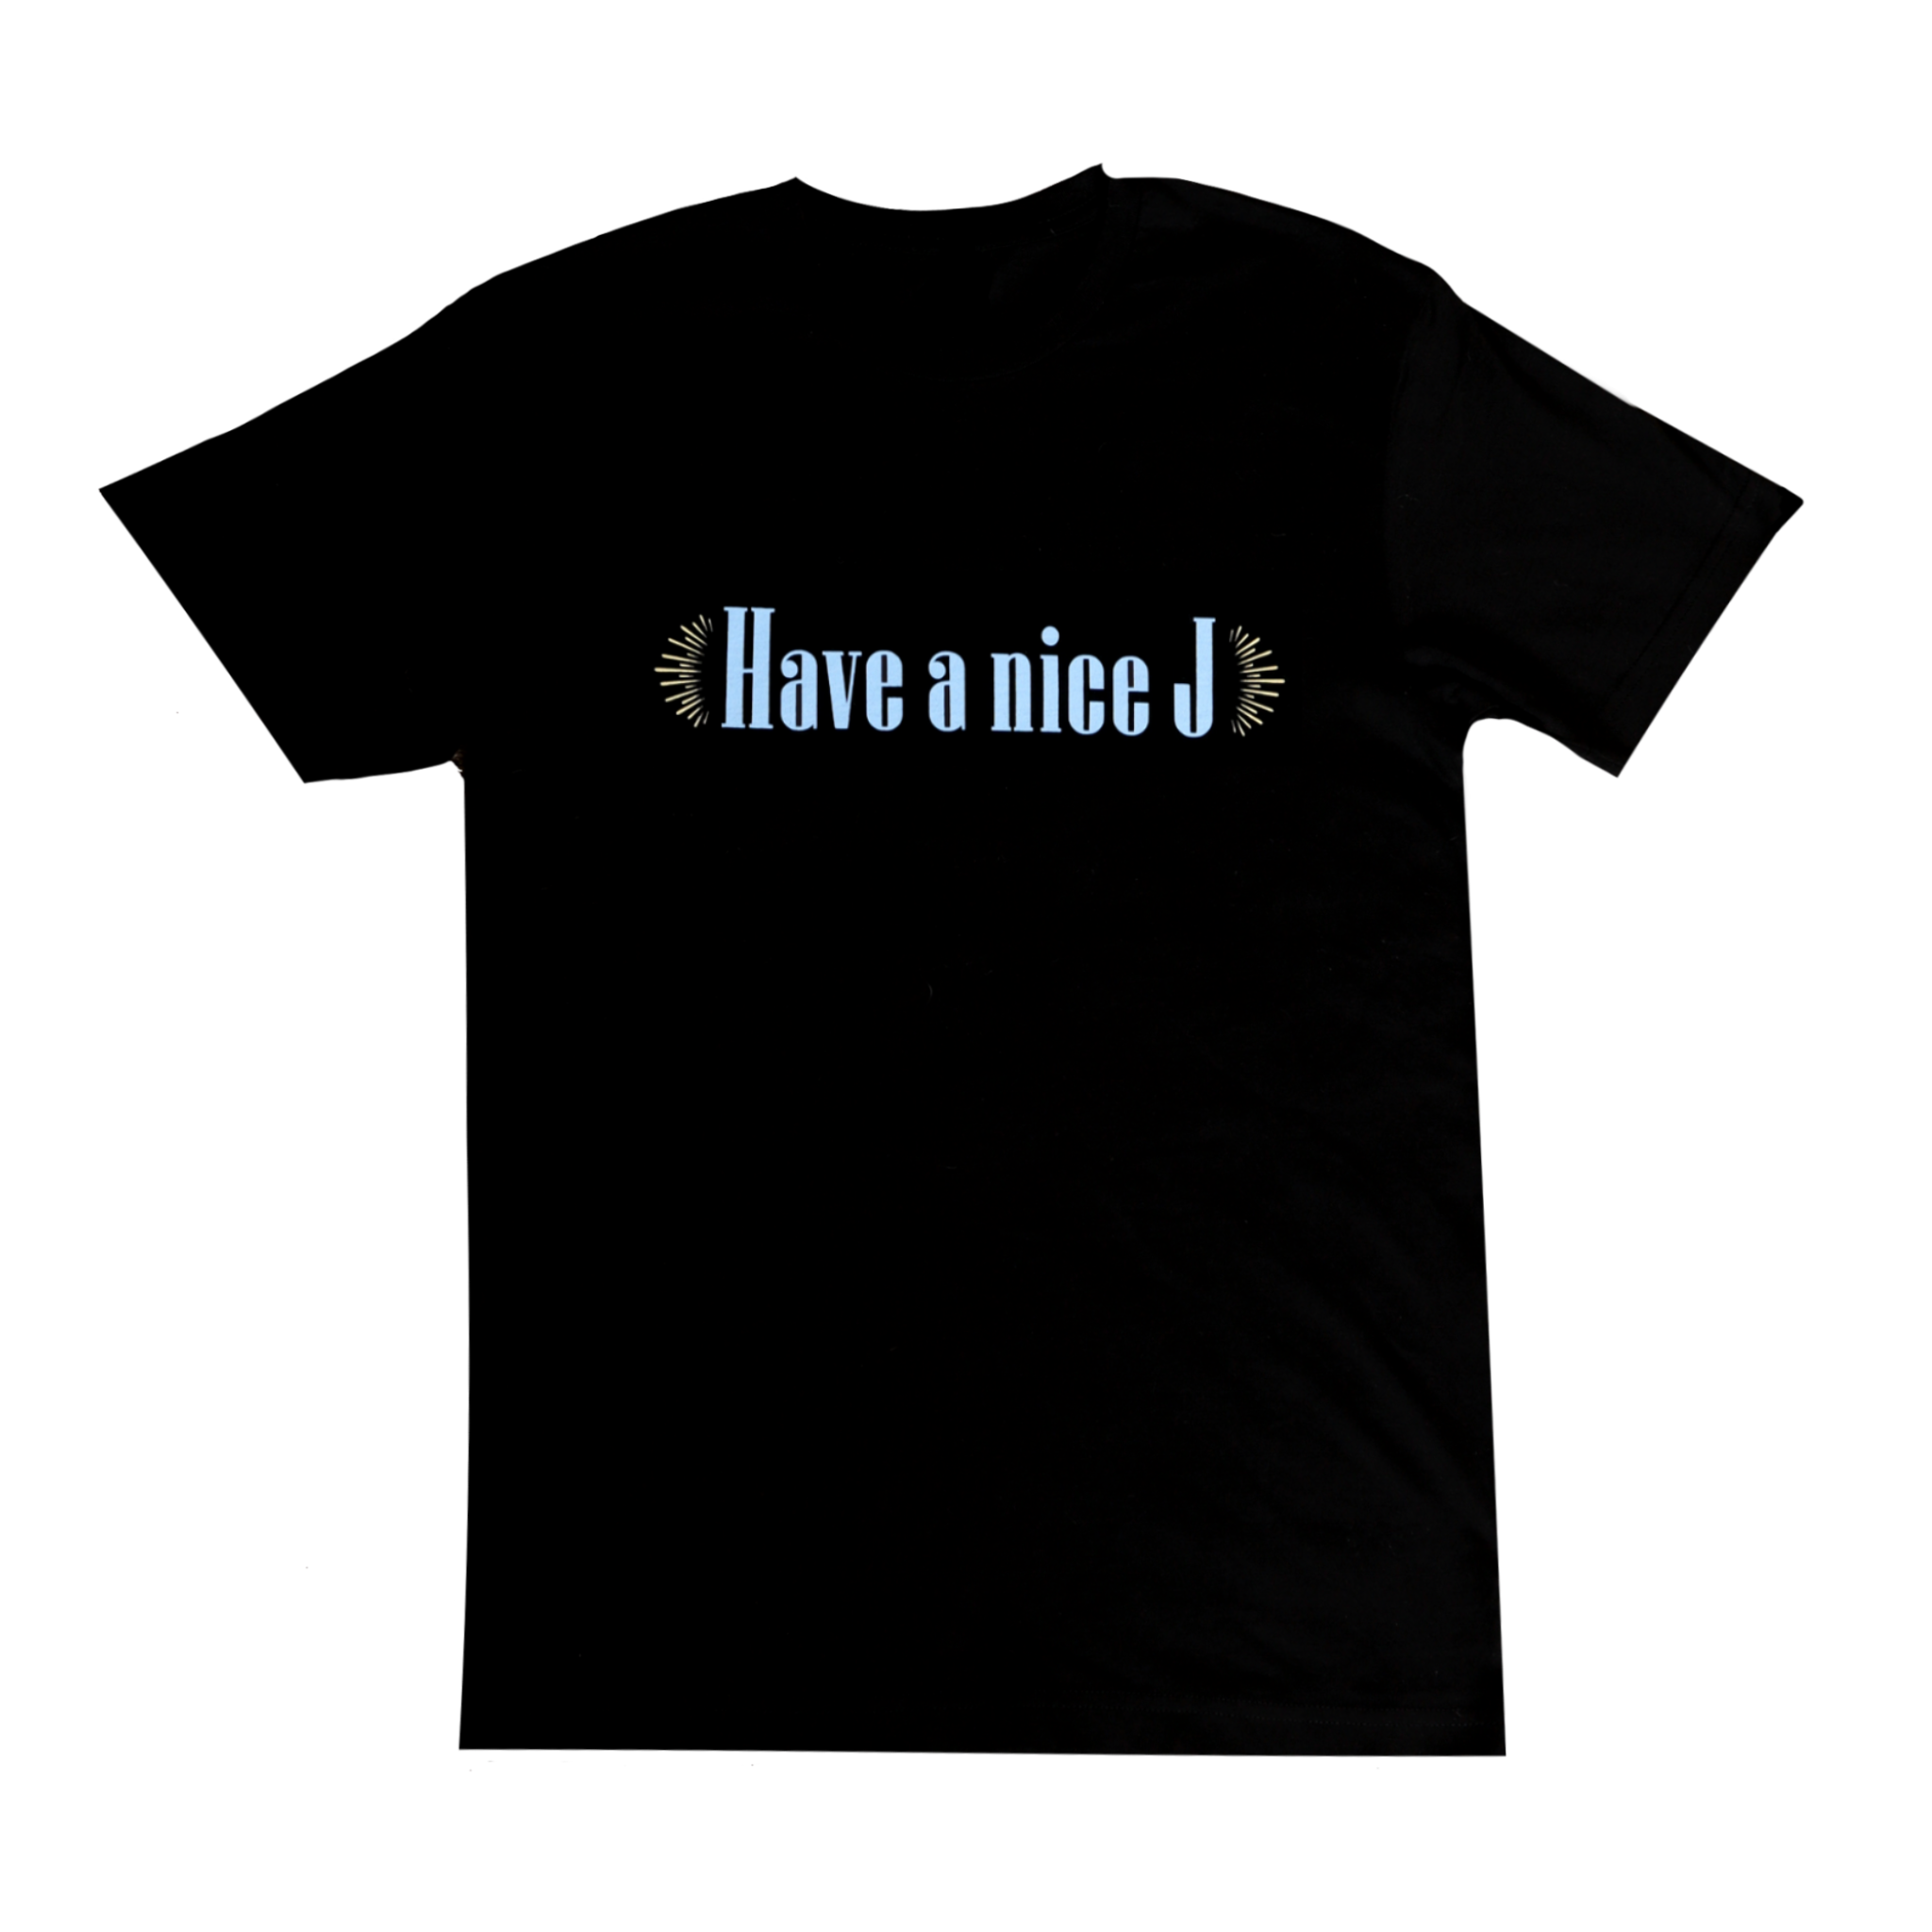 Black T-shirt with the print "Have a nice J"